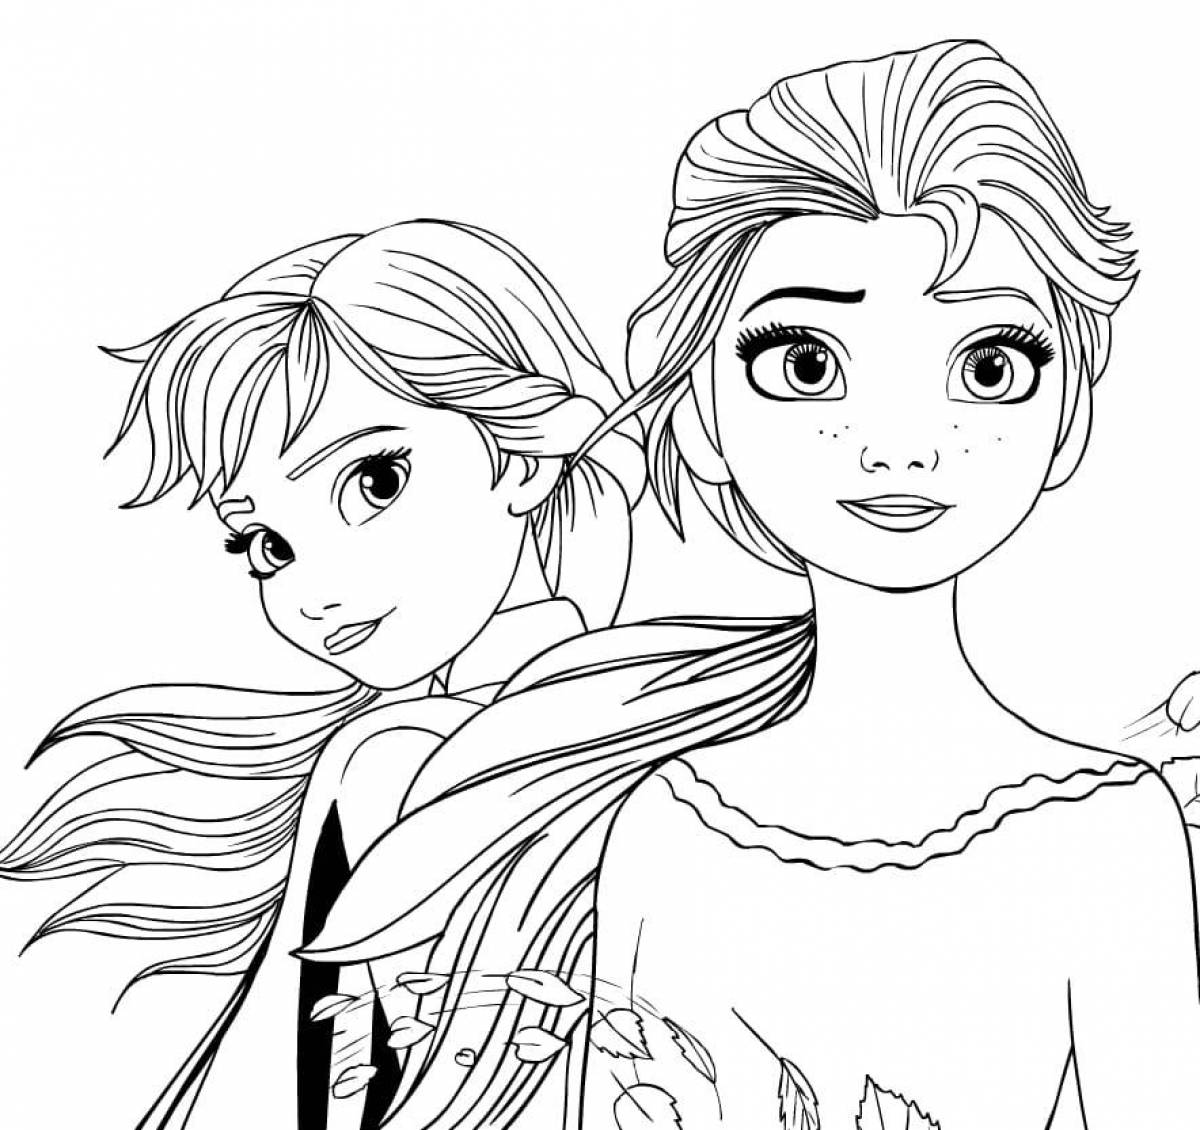 Exquisite elsa and anna frozen coloring book